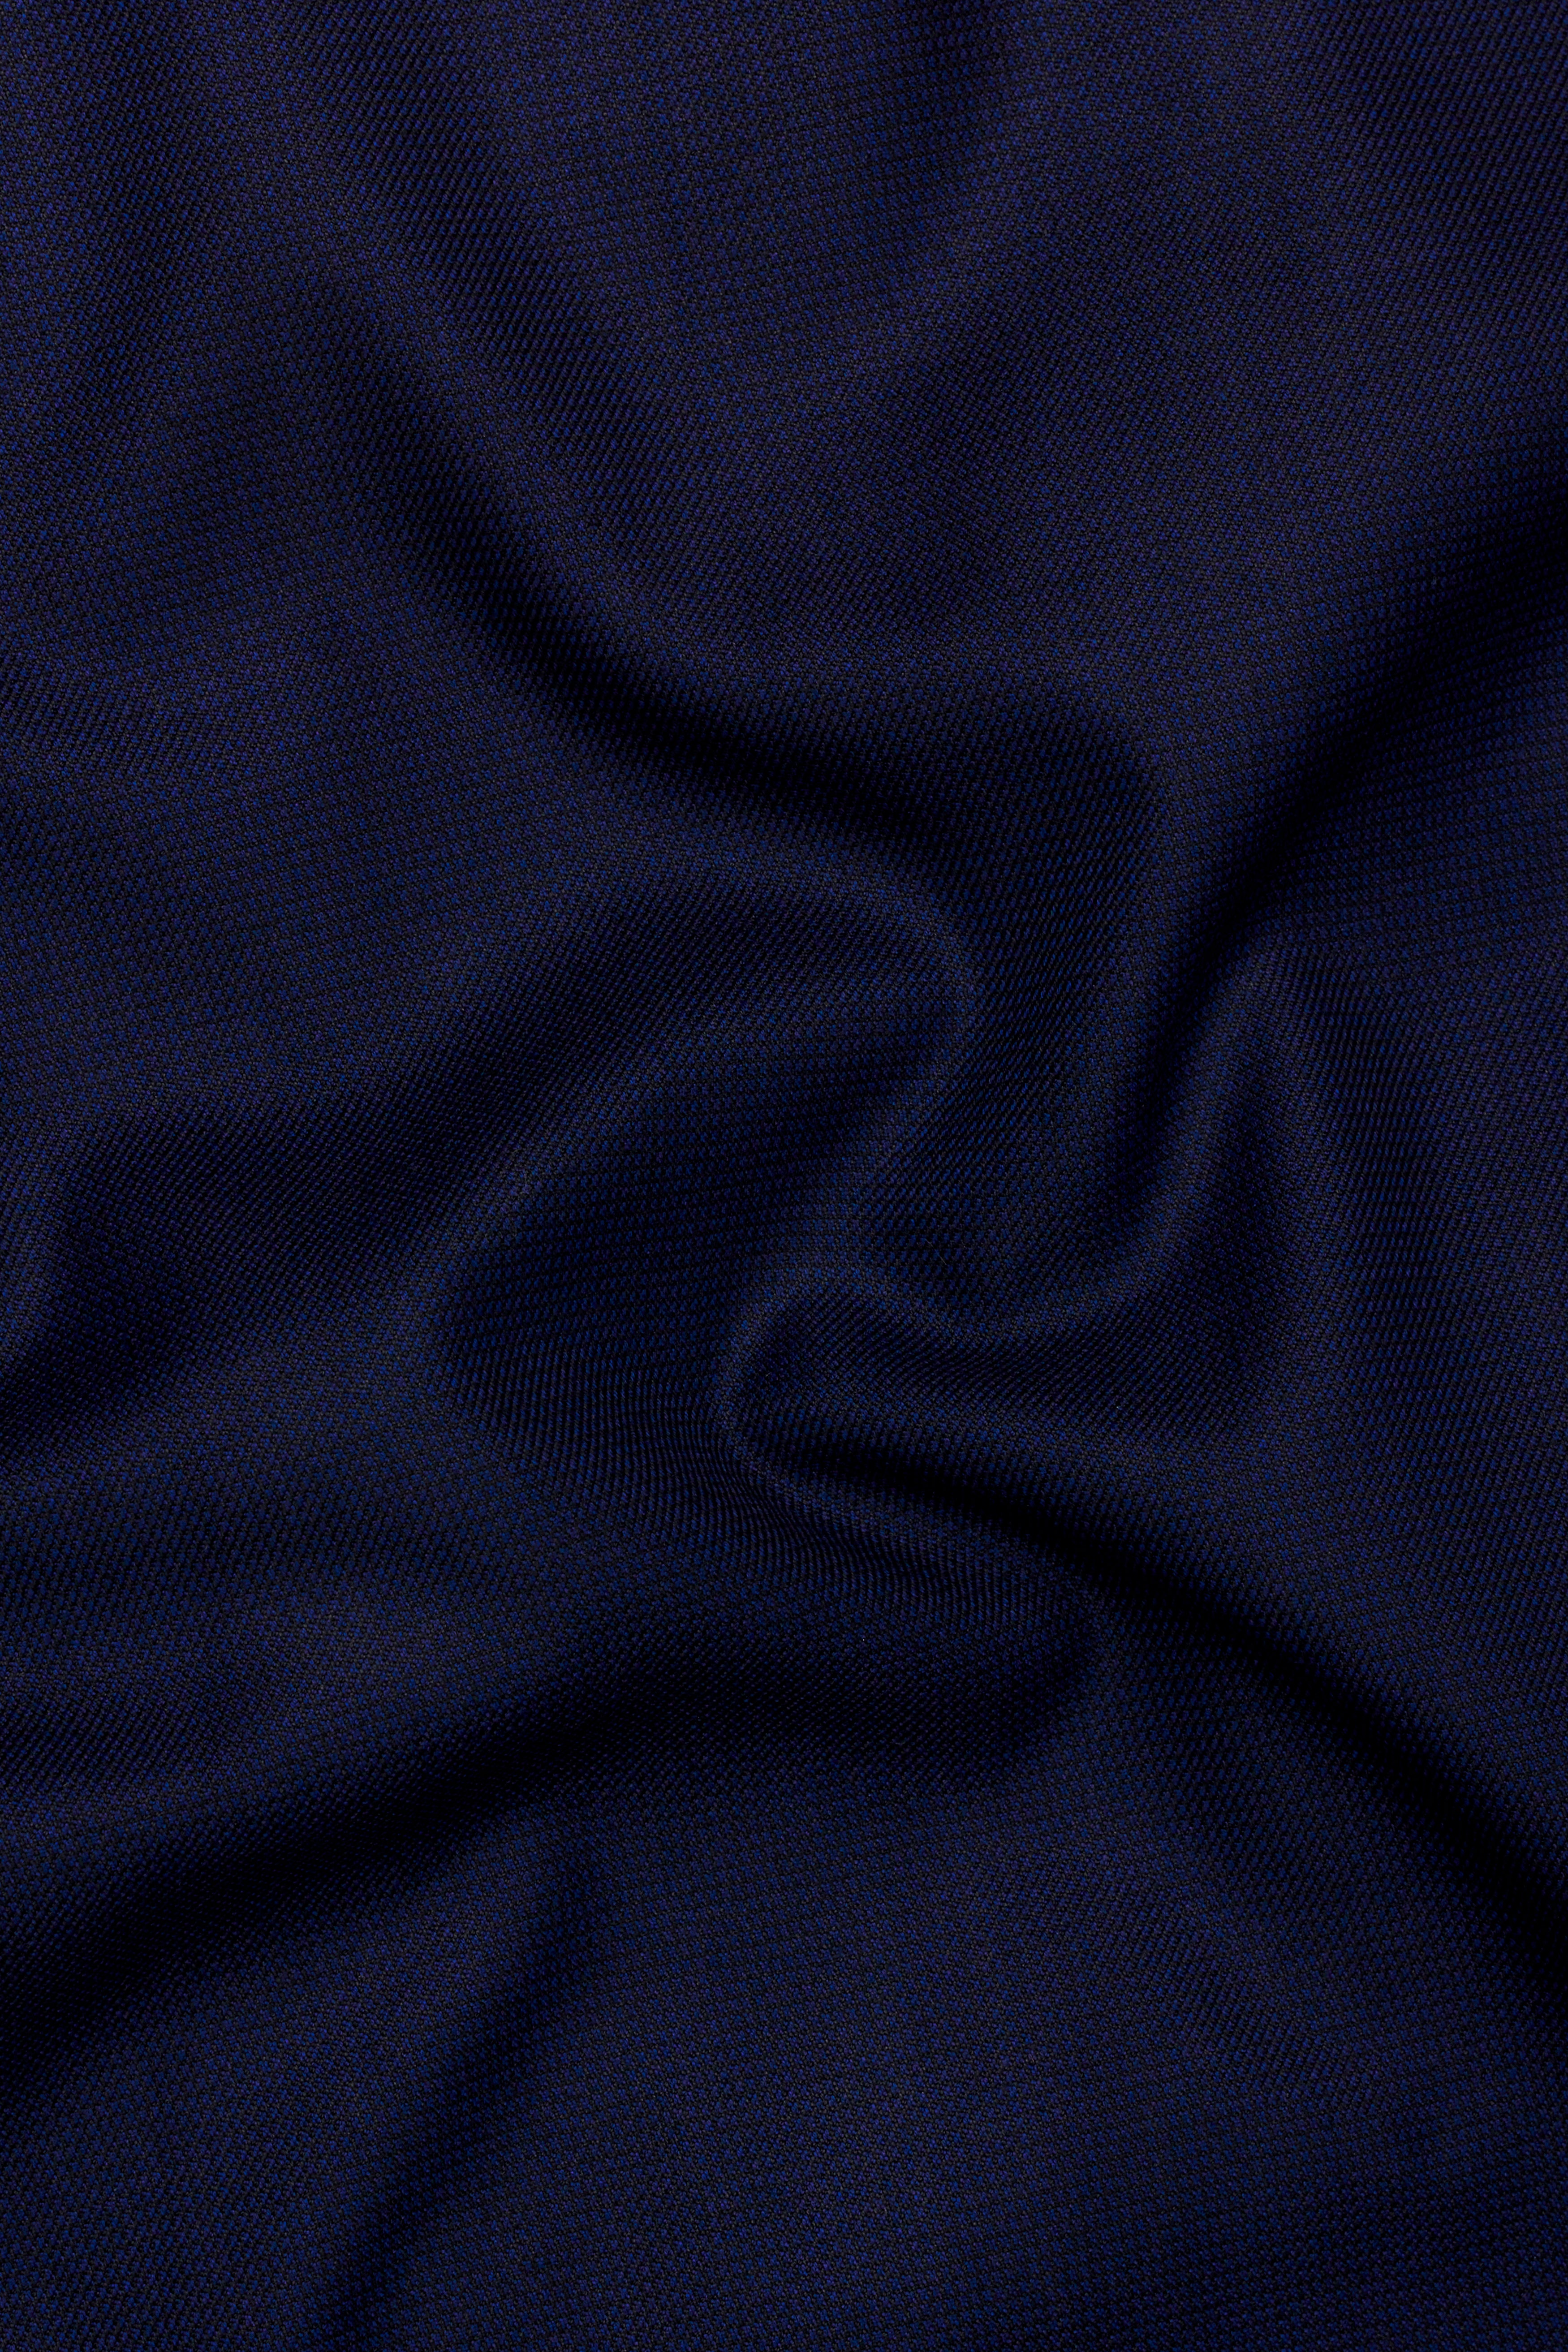 Midnight Navy Blue Wool Rich Single Breasted Suit ST2753-SB-36, ST2753-SB-38, ST2753-SB-40, ST2753-SB-42, ST2753-SB-44, ST2753-SB-46, ST2753-SB-48, ST2753-SB-50, ST2753-SB-52, ST2753-SB-54, ST2753-SB-56, ST2753-SB-58, ST2753-SB-60